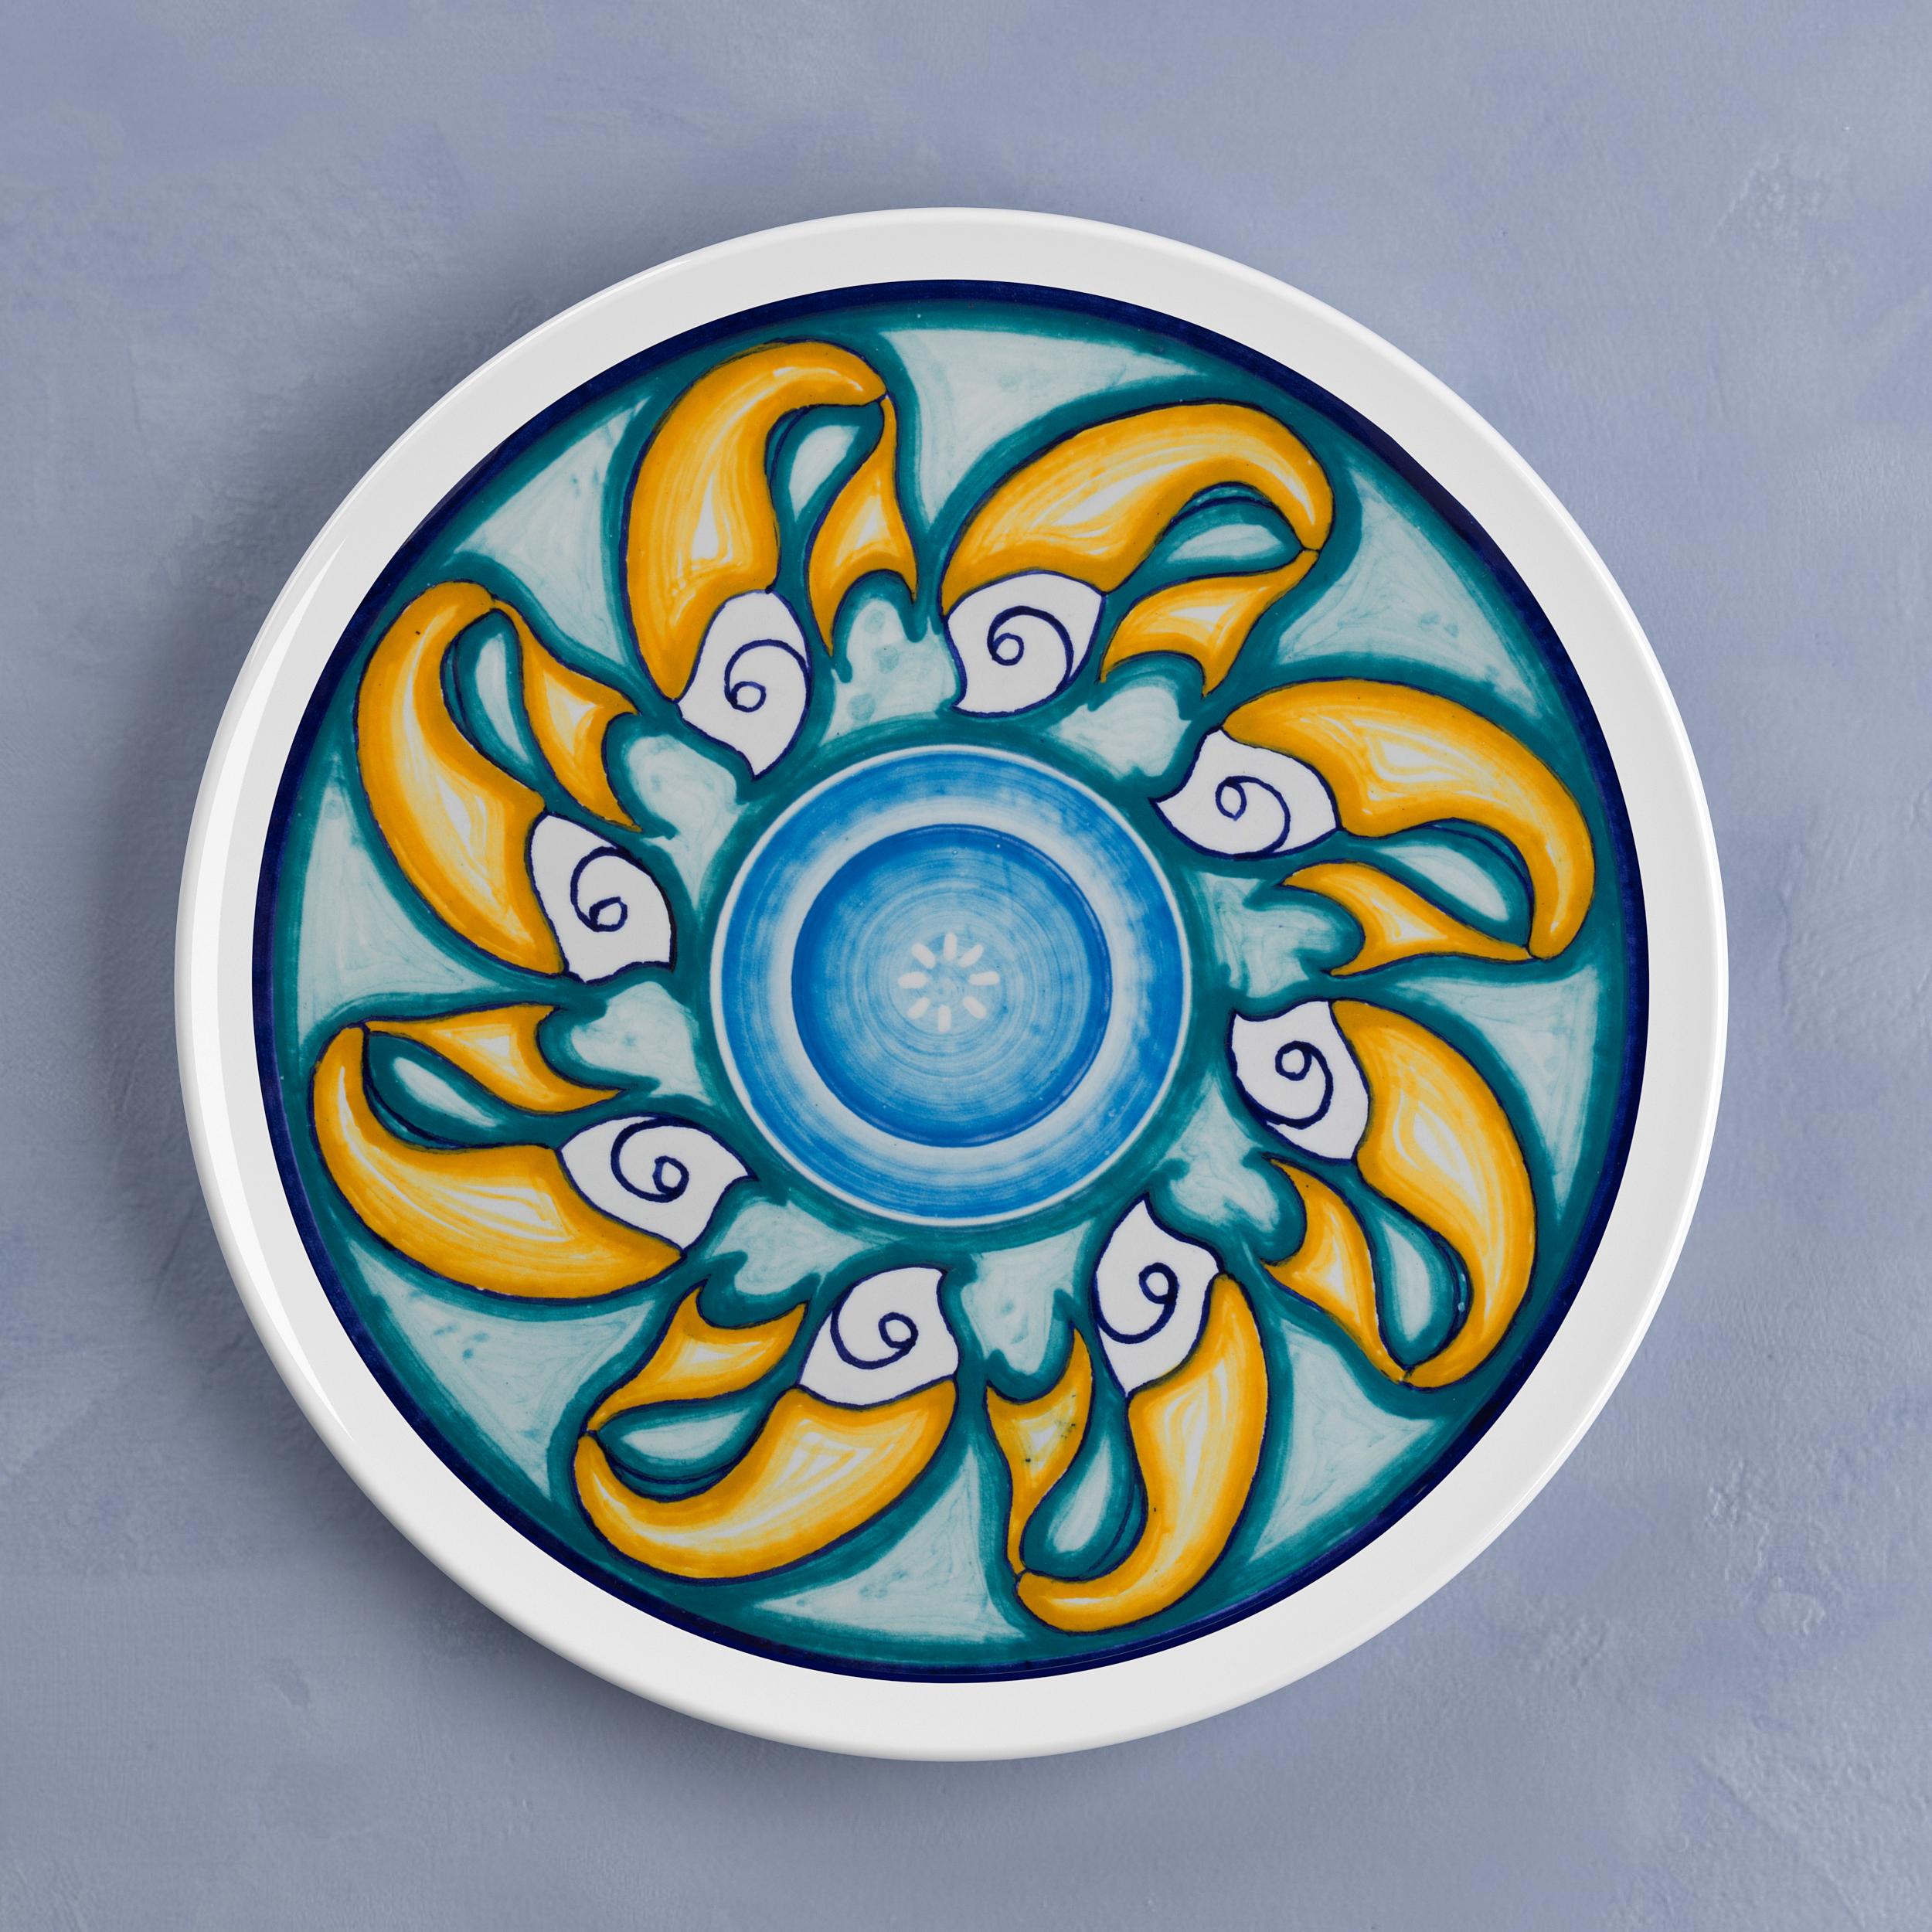 Beautiful set of 6 Sicilian Clay Colapesce handcrafted dinner plates by Crisodora will make an elegant statement with sophisticated Art de la table for every occasion.

Hand-painted.

Made in Sicily (Italy) by Master Artisans.